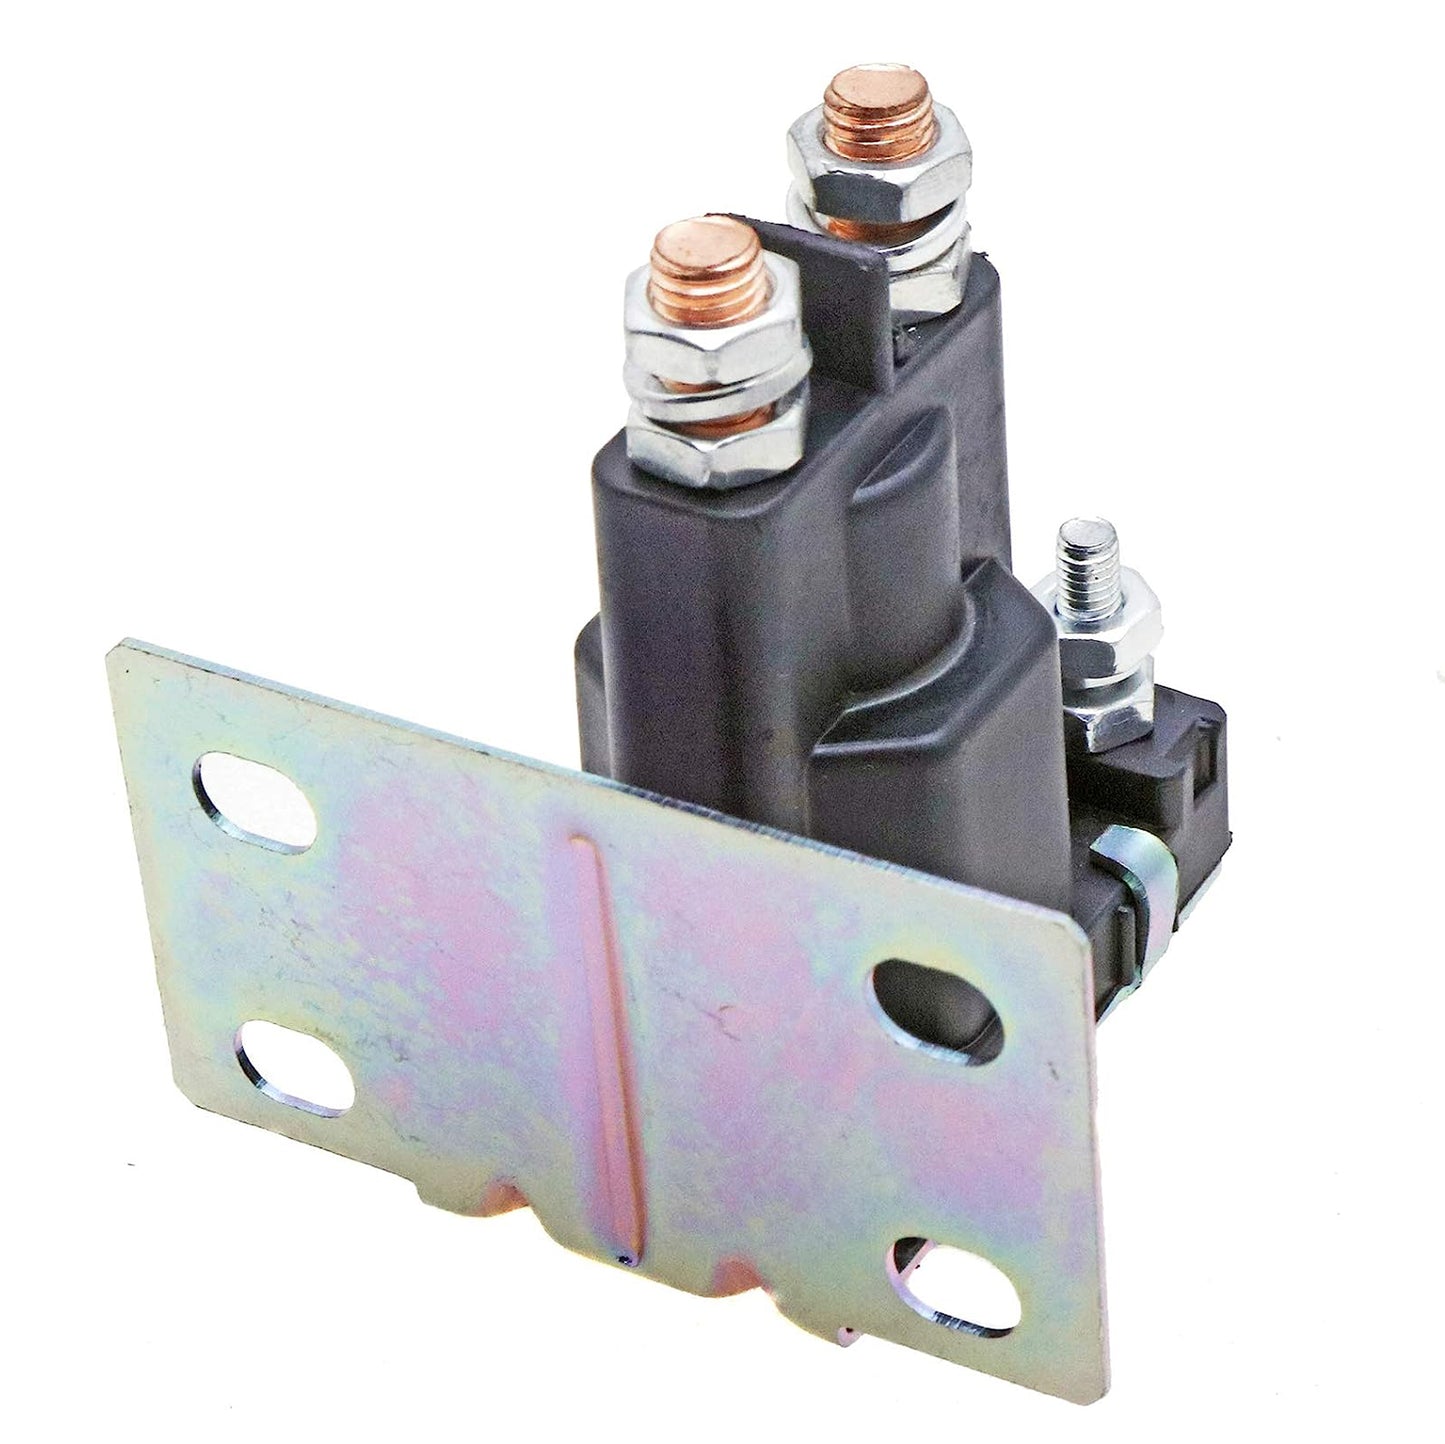 AM104036 Starter Solenoid Compatible With John Deere GX75 GX95 R70 R92 R72 RX95